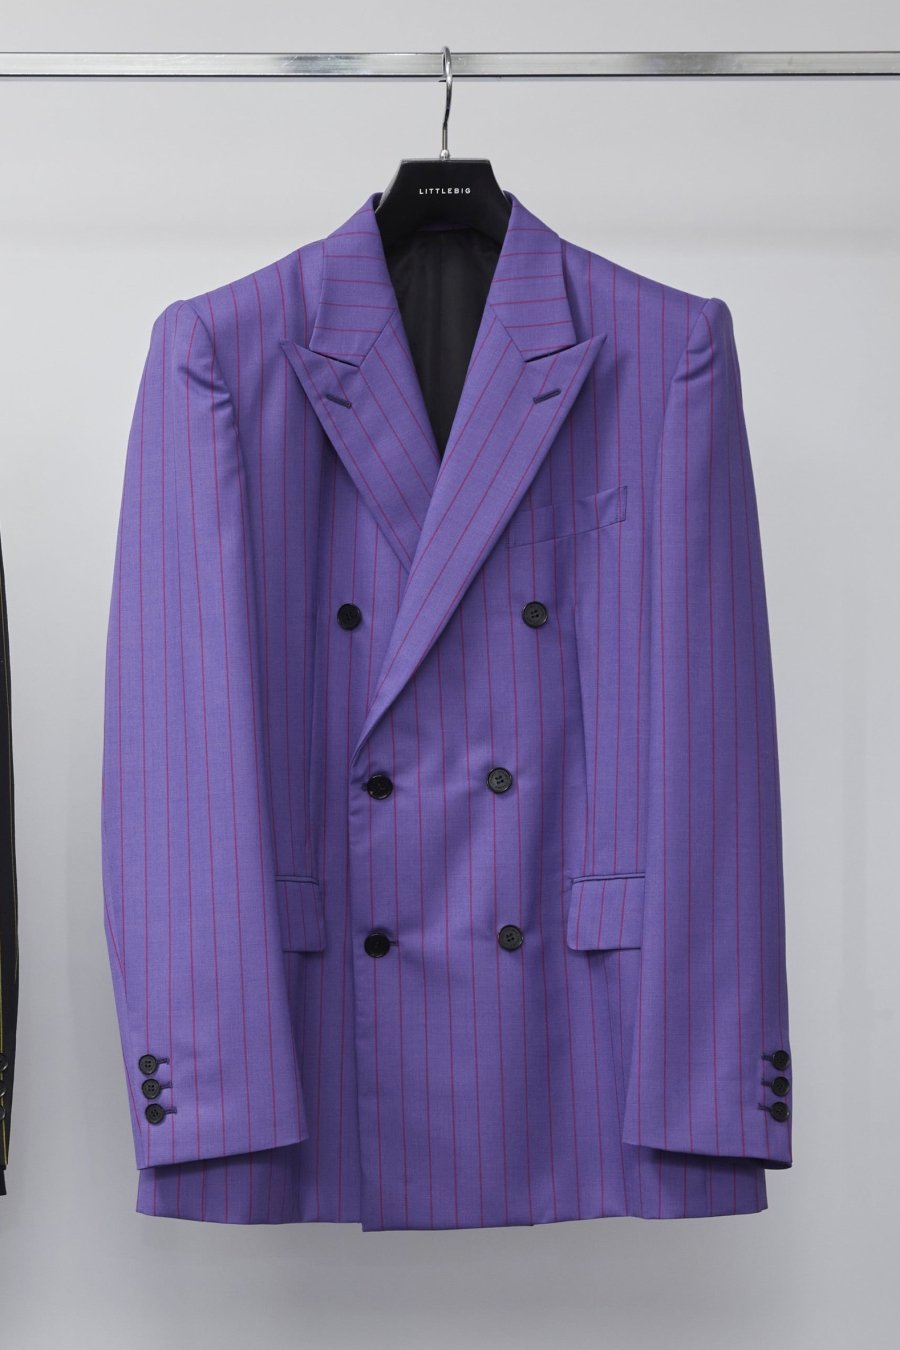 LITTLEBIG（リトルビッグ）の22ss Concaved Shoulder Jacket Purple ...